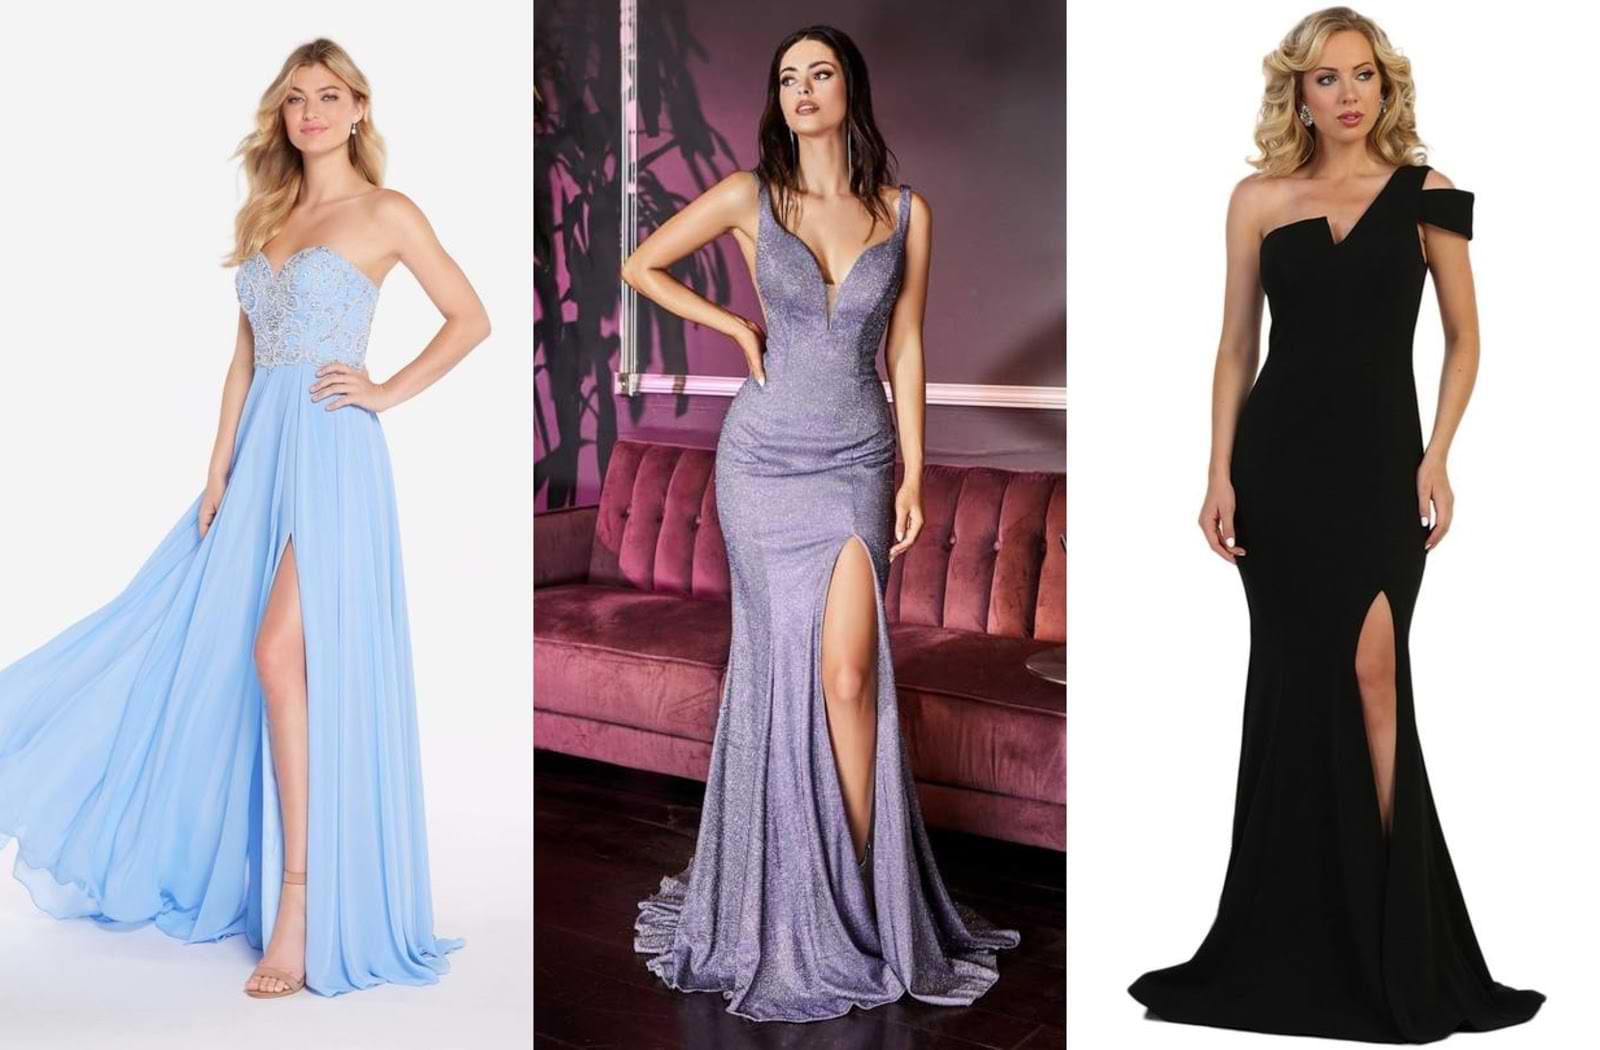 3 Clever Ways to Do Prom on a Budget